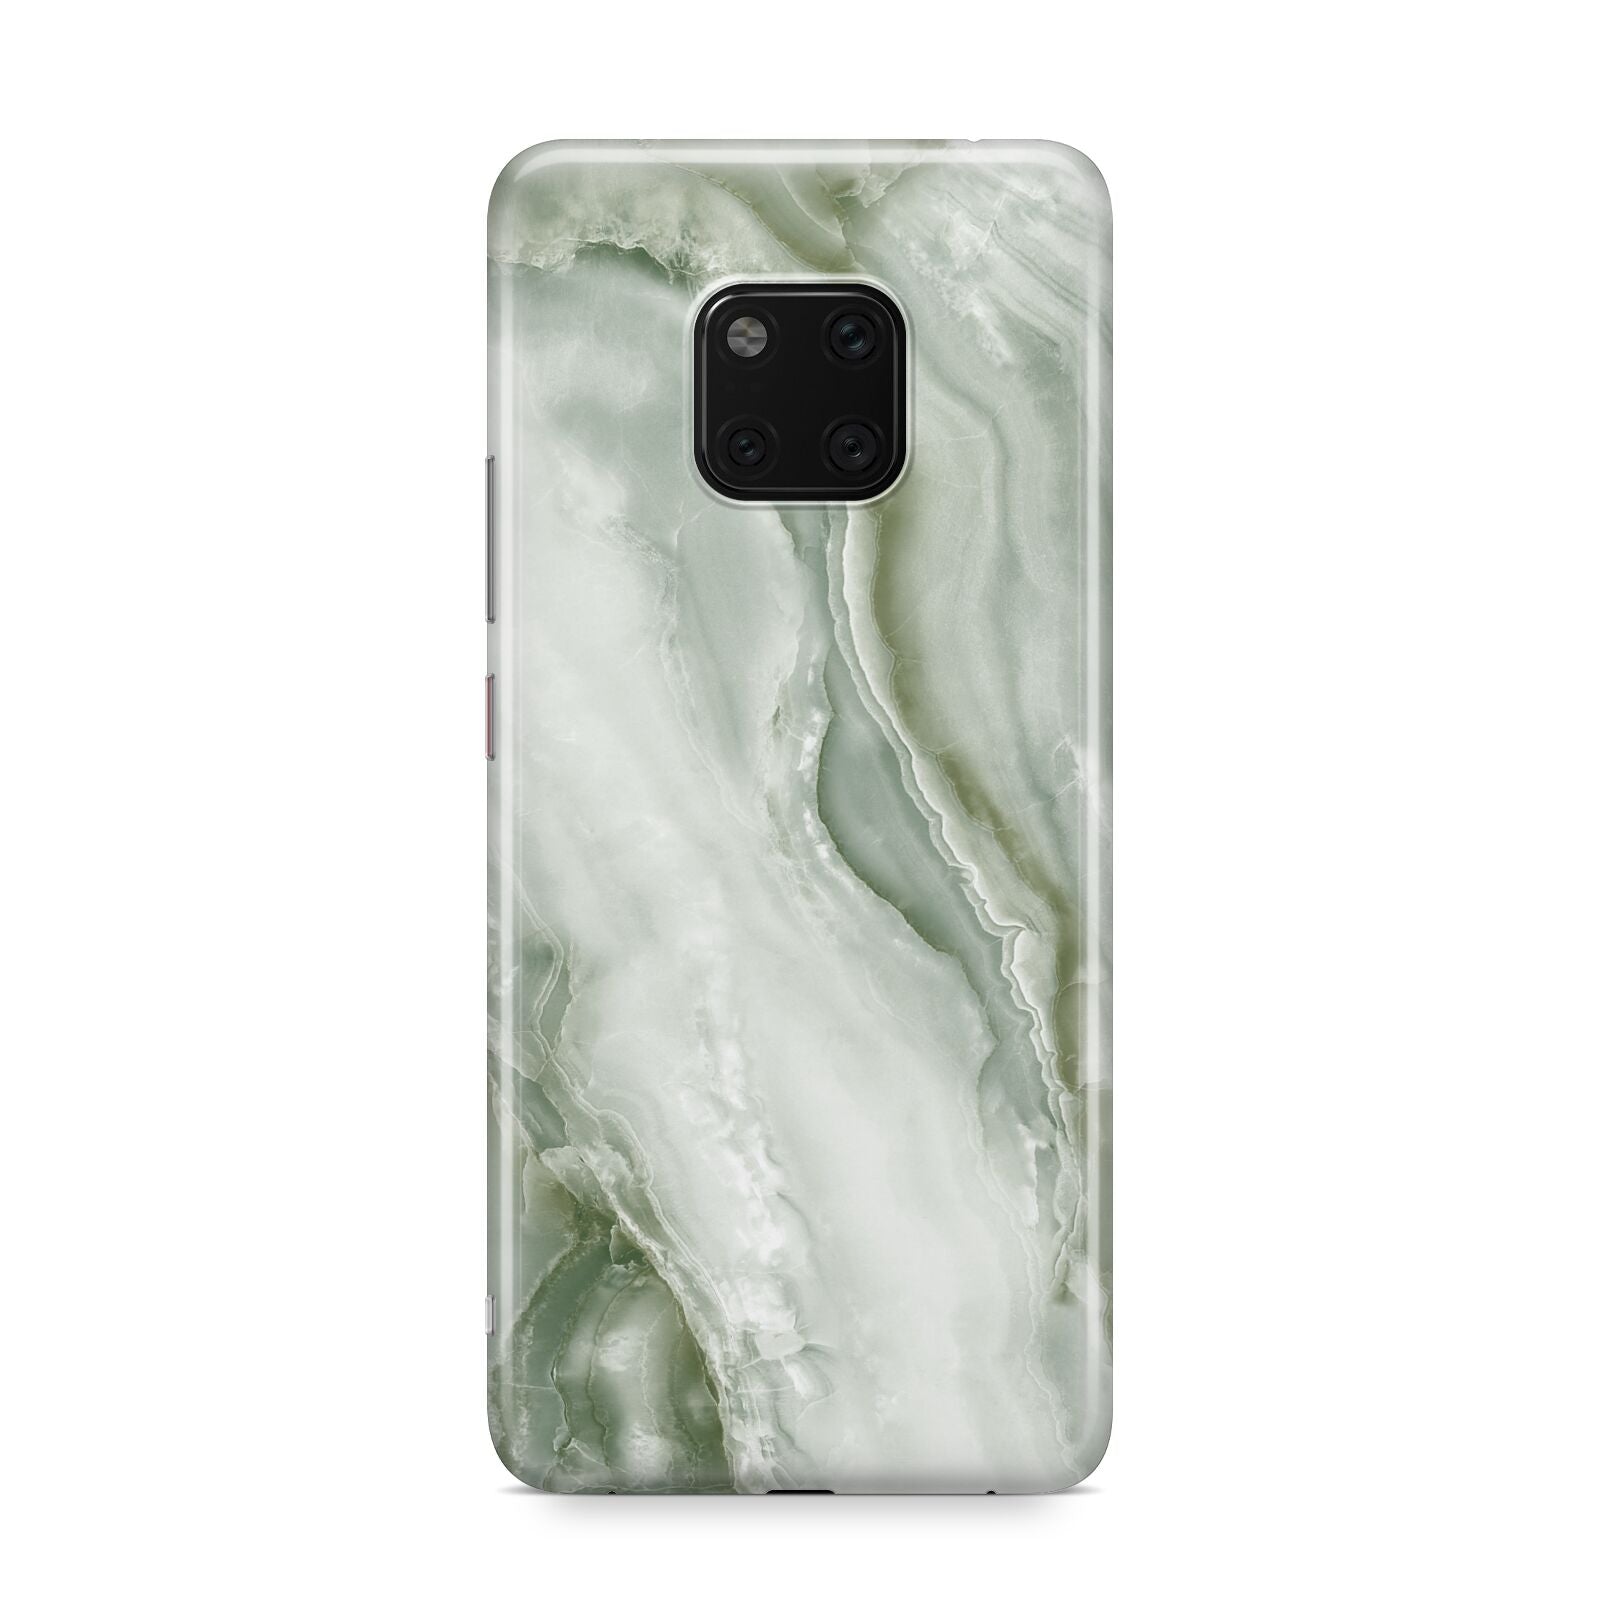 Pistachio Green Marble Huawei Mate 20 Pro Phone Case